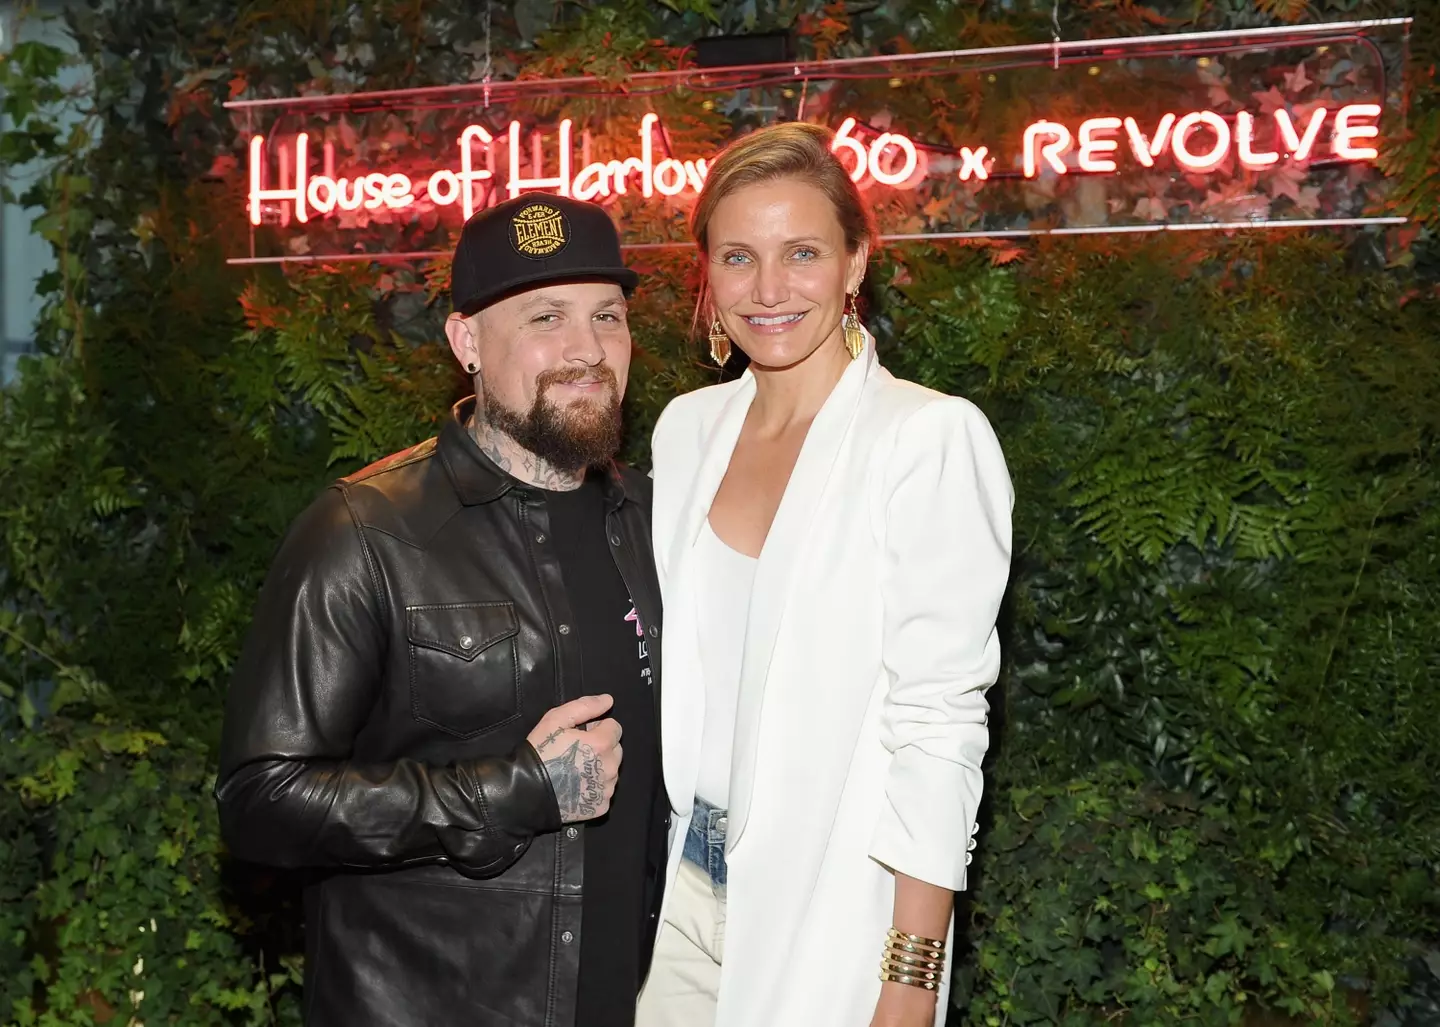 Diaz is currently married to Benji Madden.